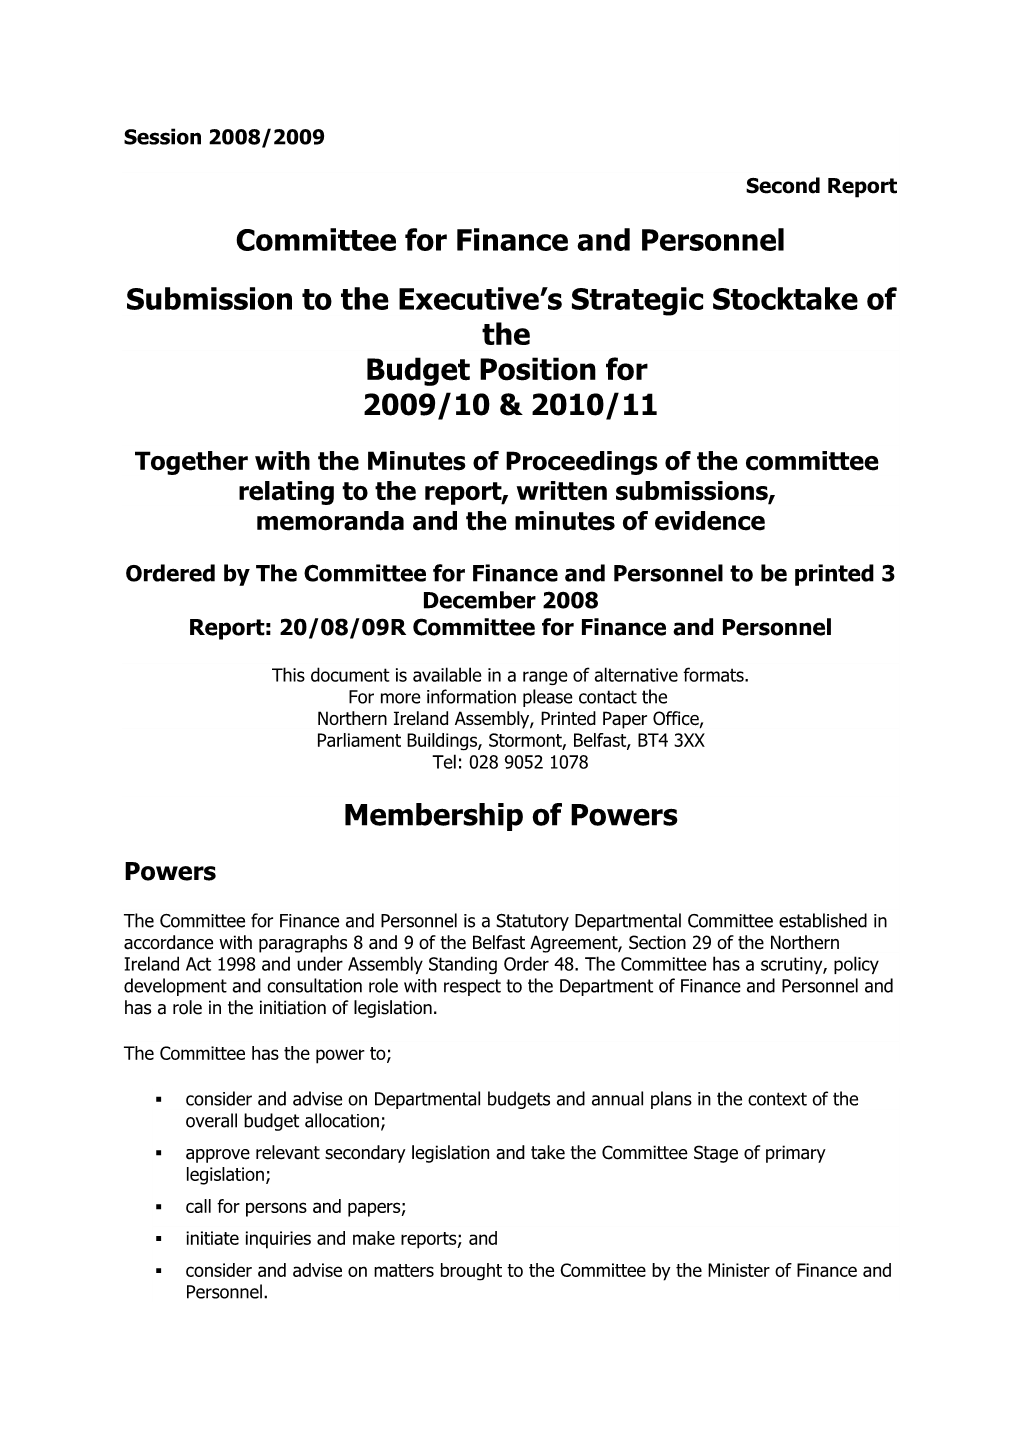 Committee for Finance and Personnel Submission to the Executive's